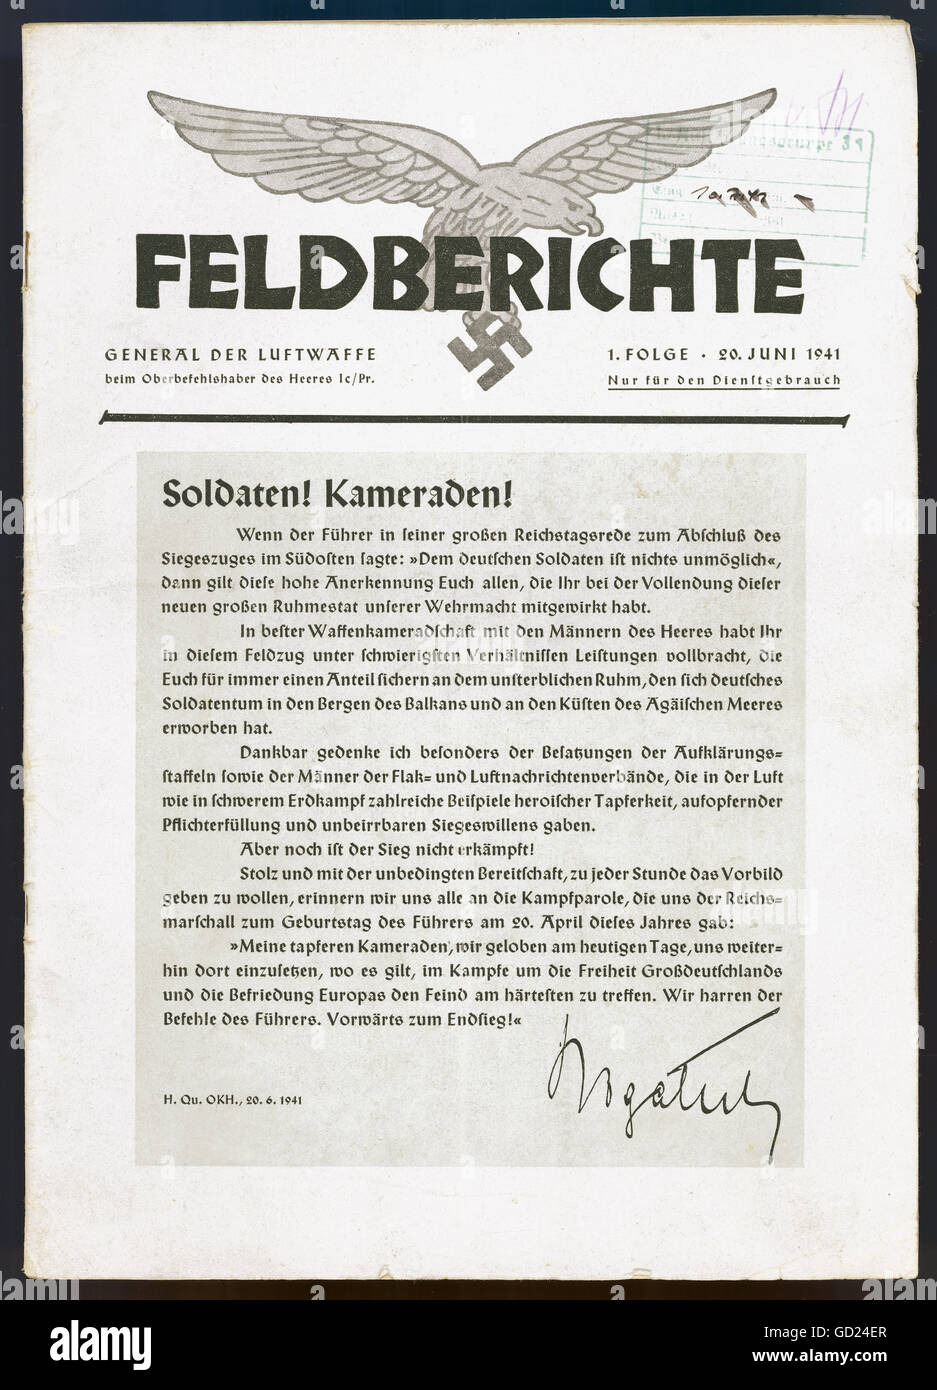 events, Second World War / WWII, propaganda, title page of the Luftwaffe periodical 'Feldberichte, General der Luftwaffe beim Oberbefehlshaber des Heeres', 20.6.1941, with an order of the day by General Rudolf Bogatsch concerning the end of the Balkans Campaign 1941, Additional-Rights-Clearences-Not Available Stock Photo